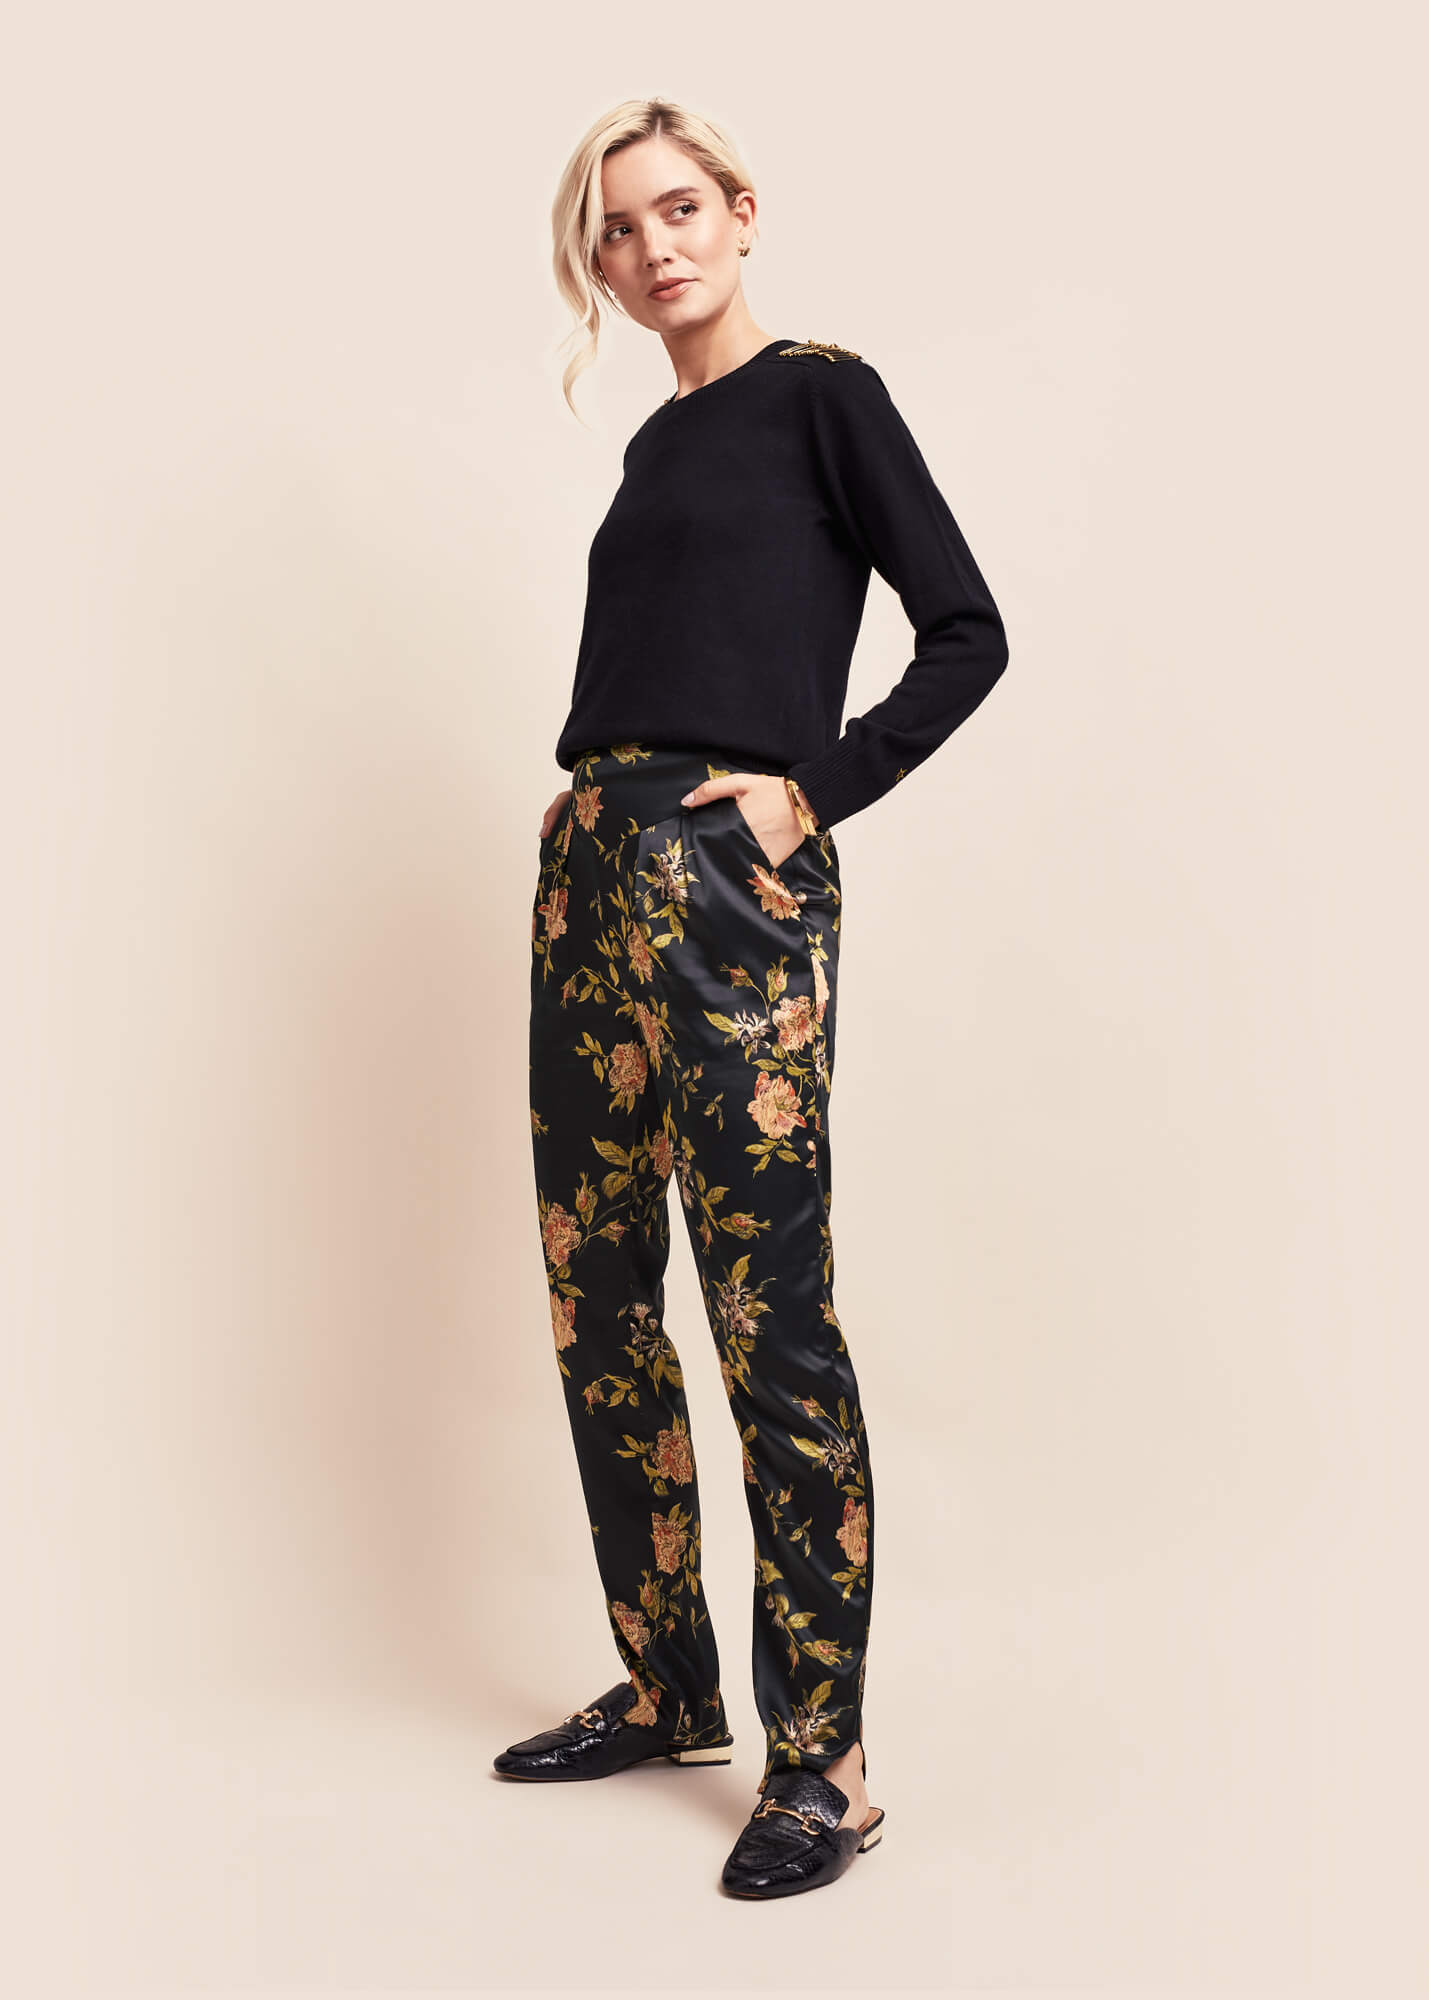 Stella McCartney pre-owned black floral printed silk trousers - size UK 10  | Sign of the Times